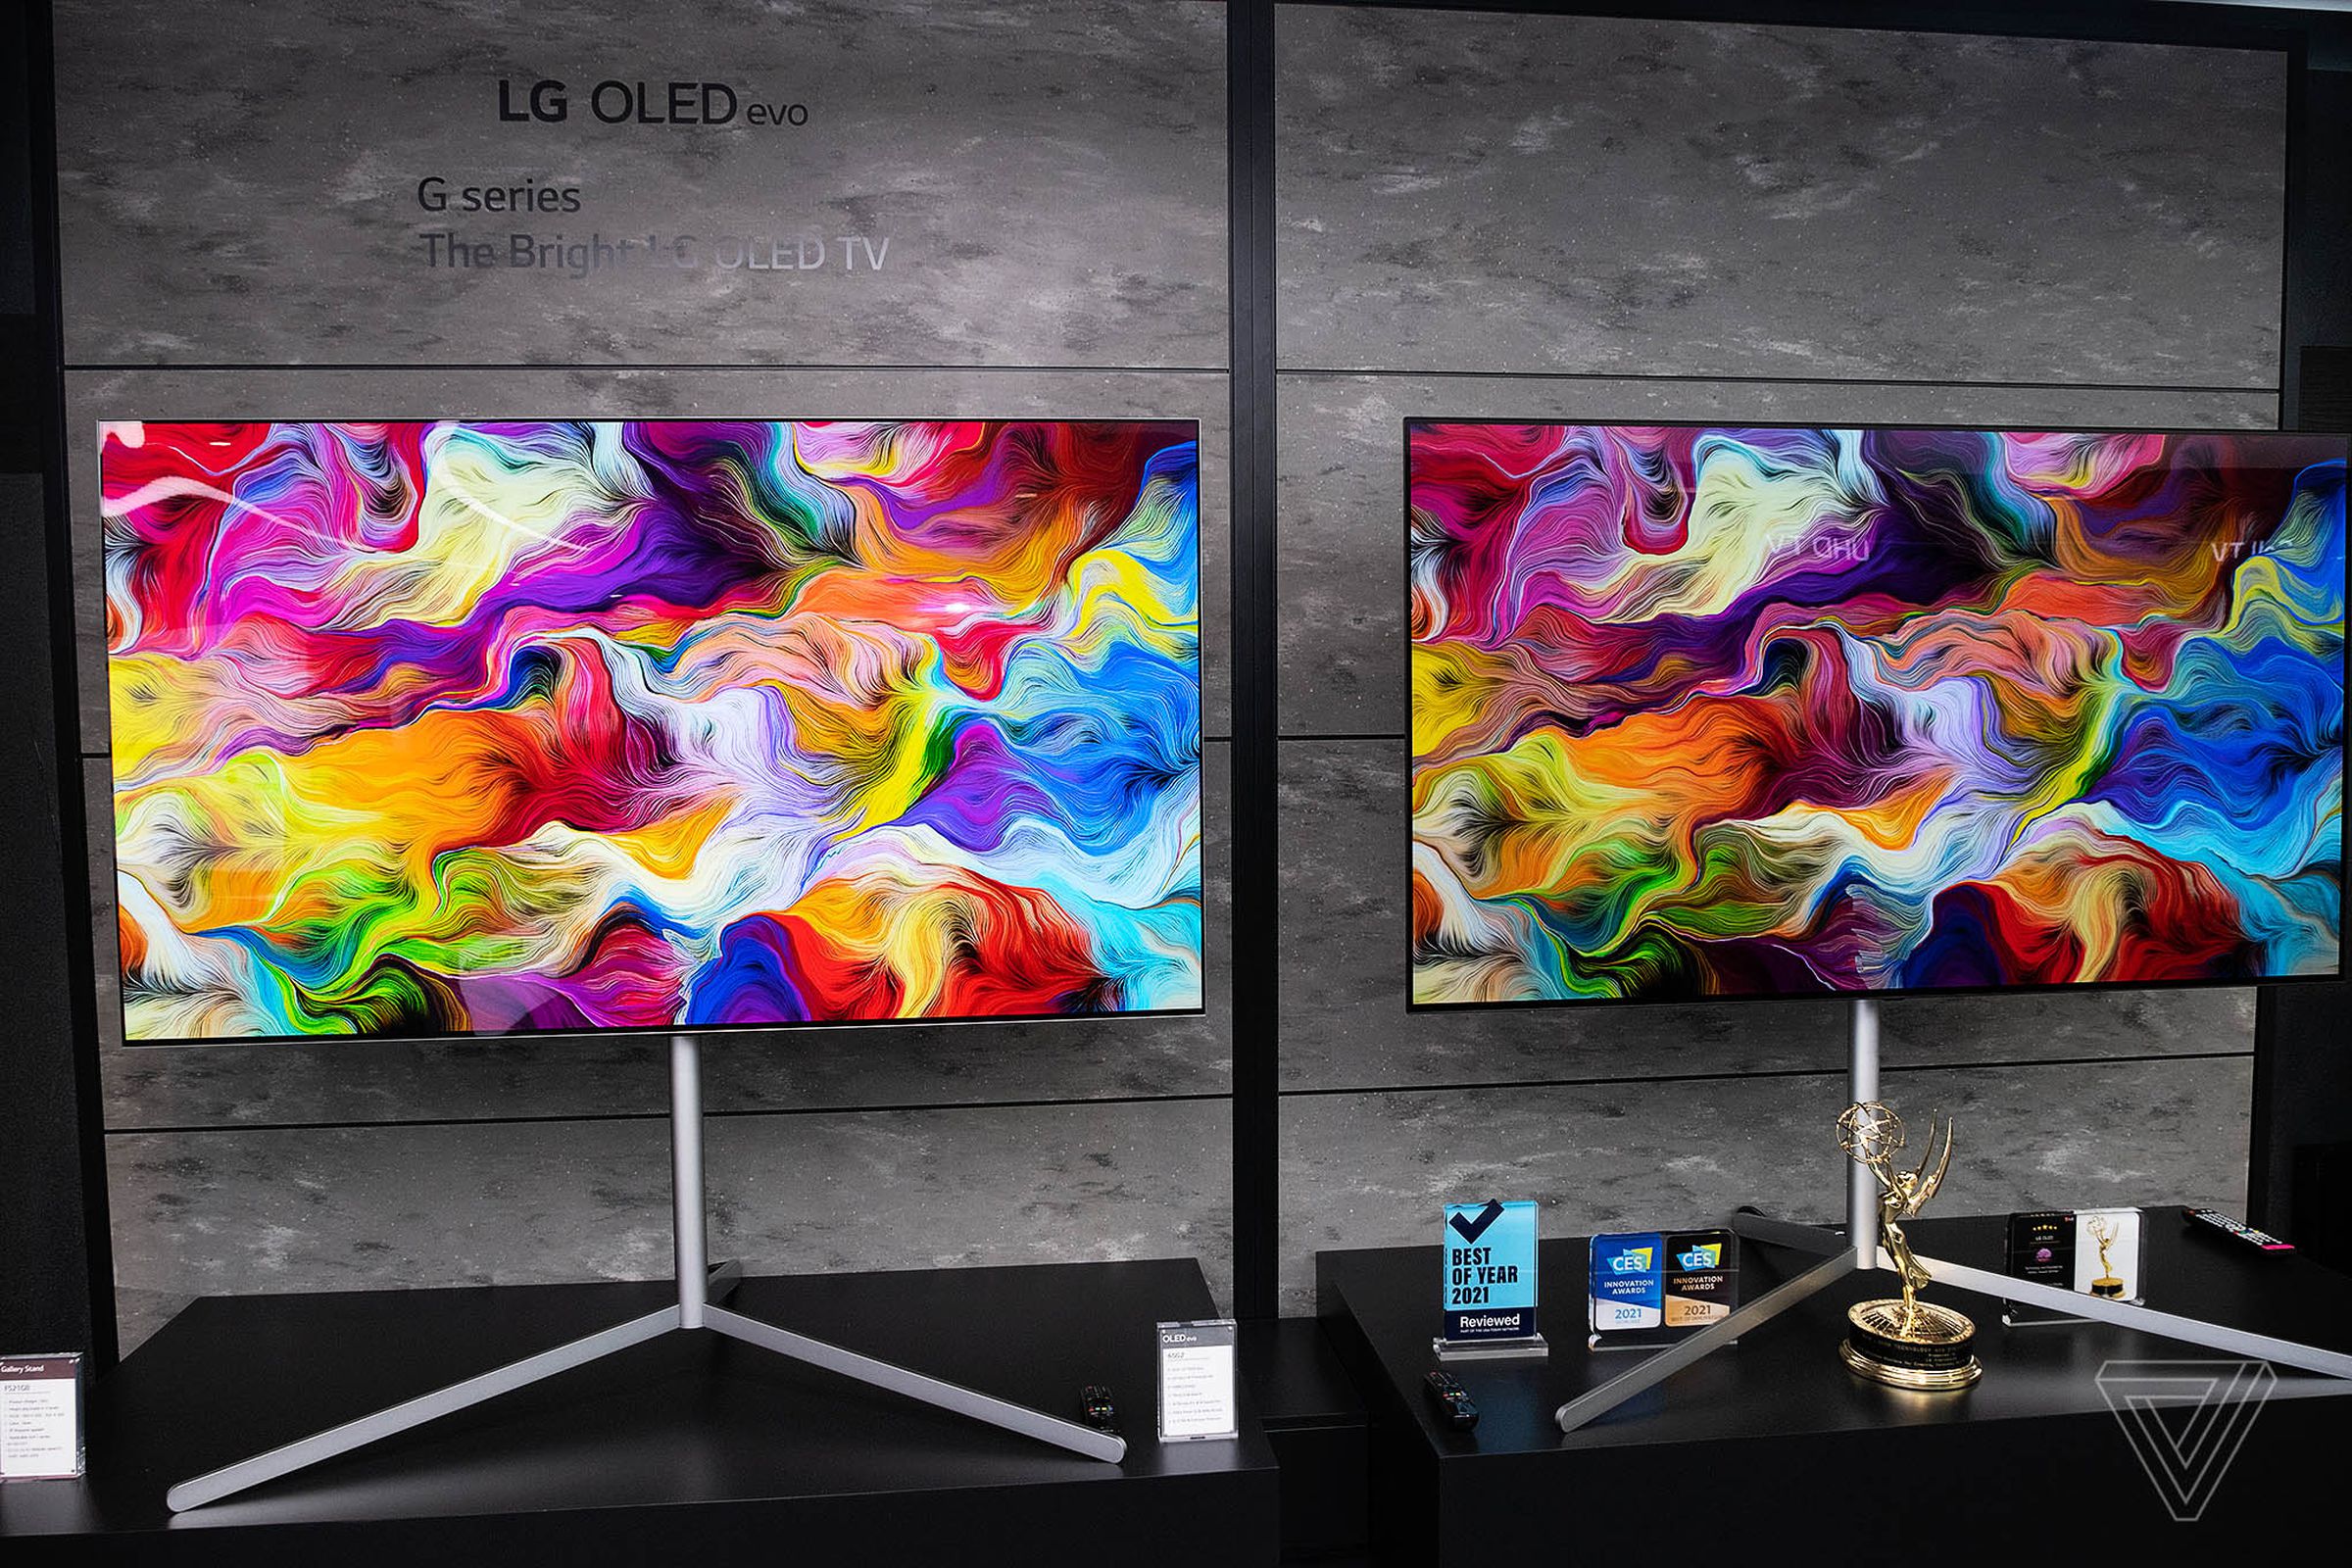 The G2 Gallery Edition uses “Brightness Booster Max” processing to achieve LG’s brightest OLED picture yet.